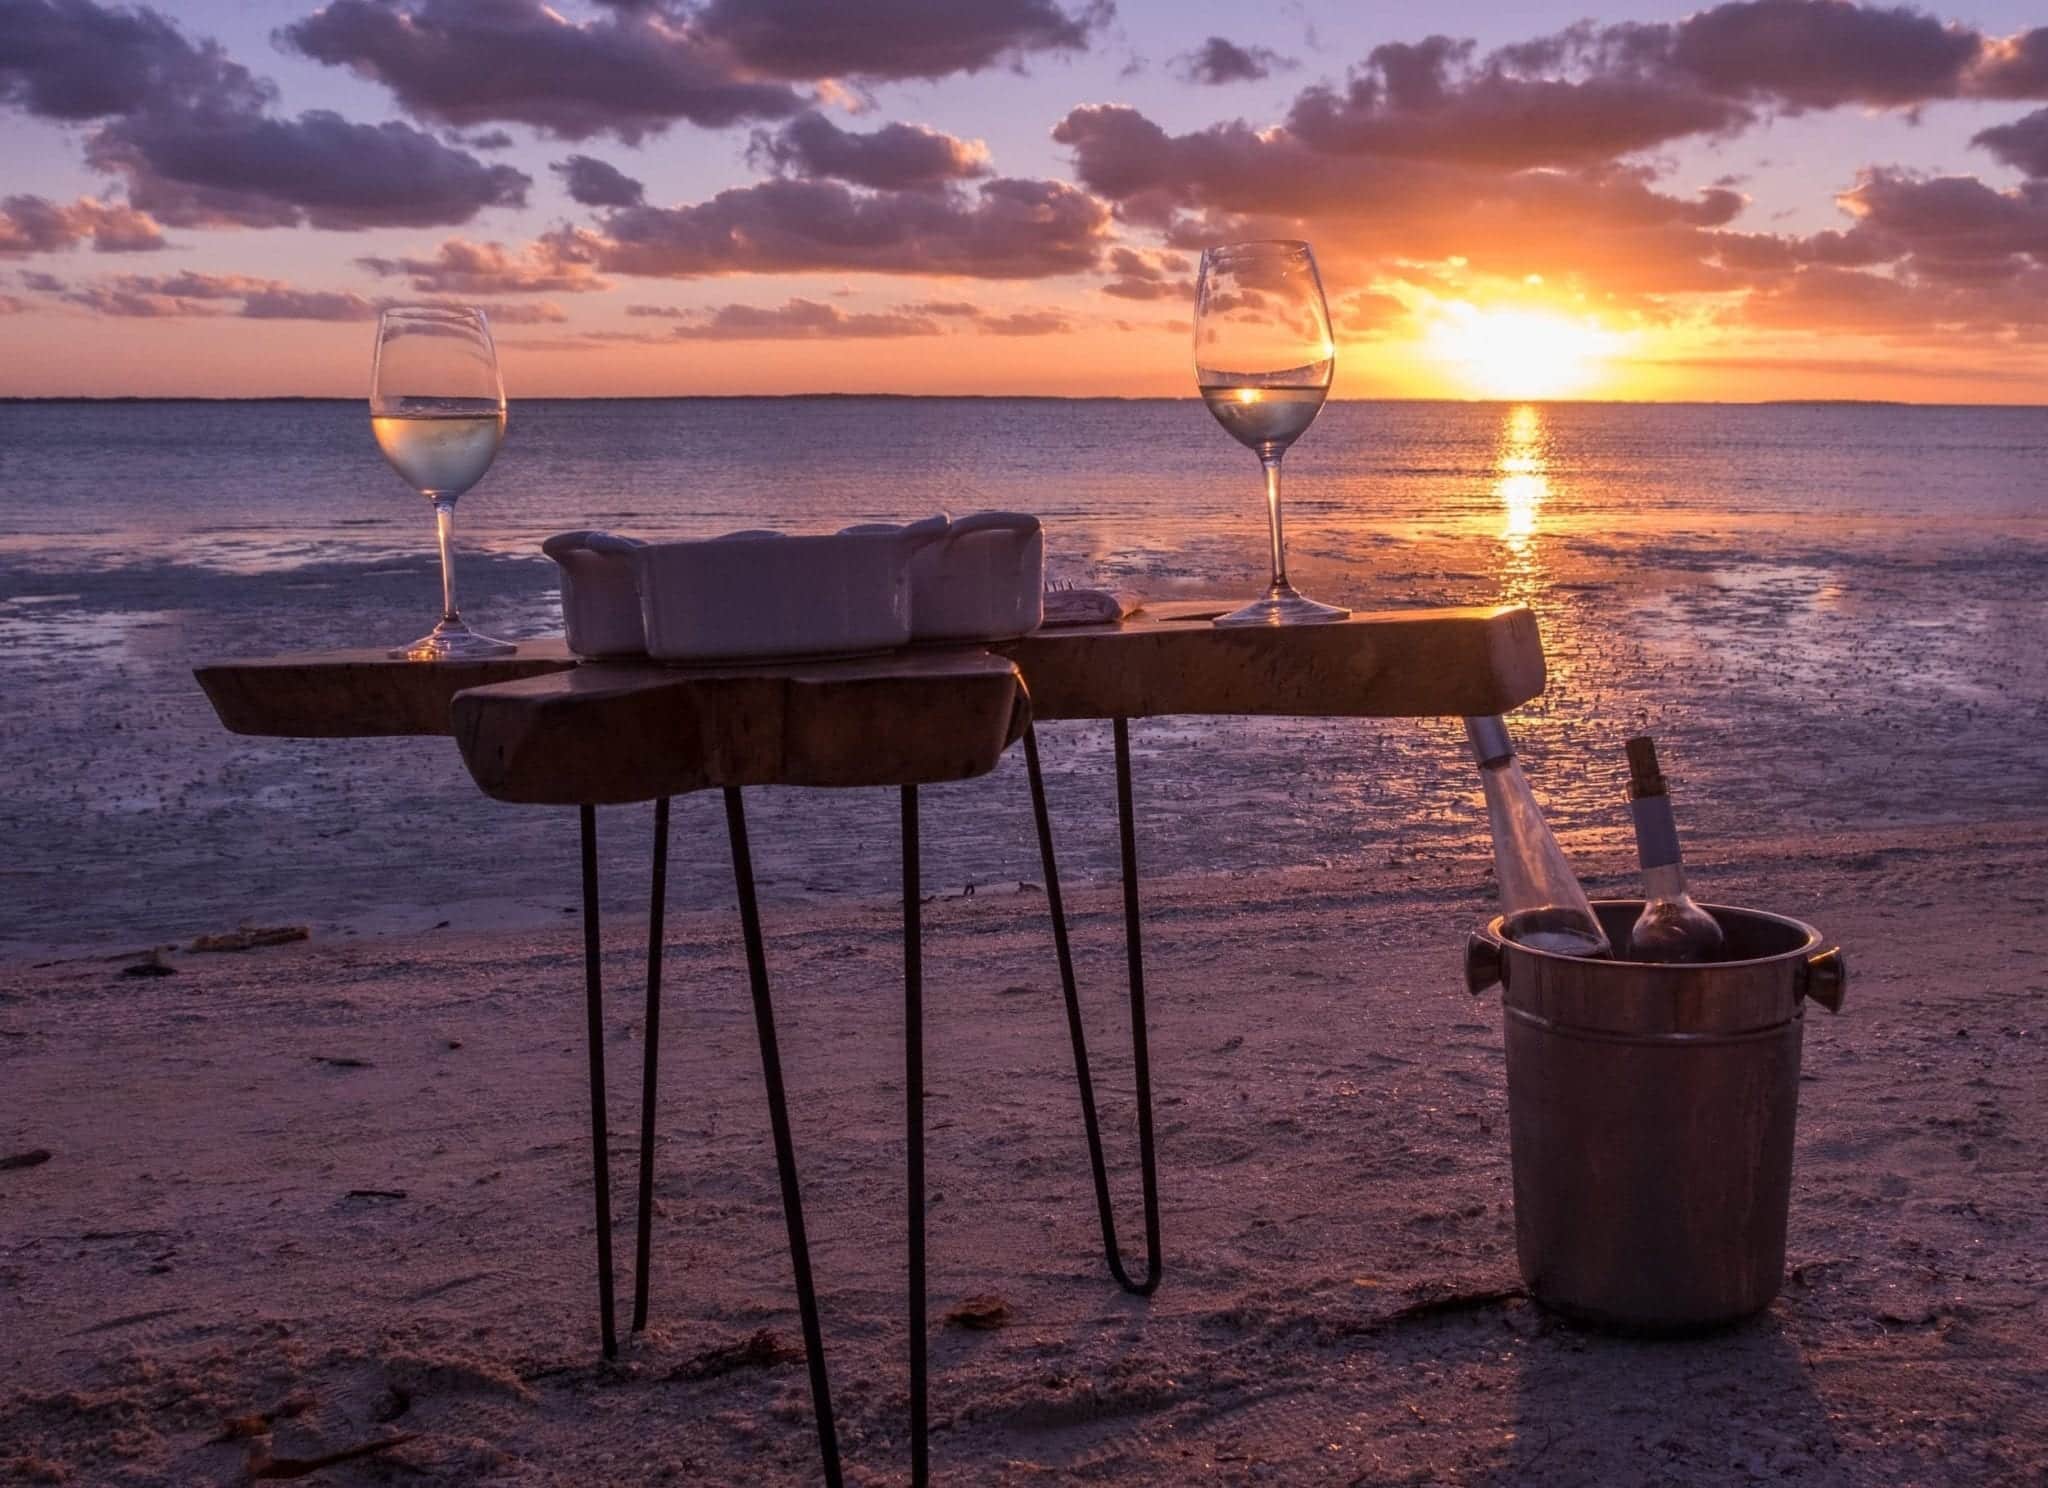 Table on the beach at sunset with two wine glasses and an ice bucket with two bottles of wine.